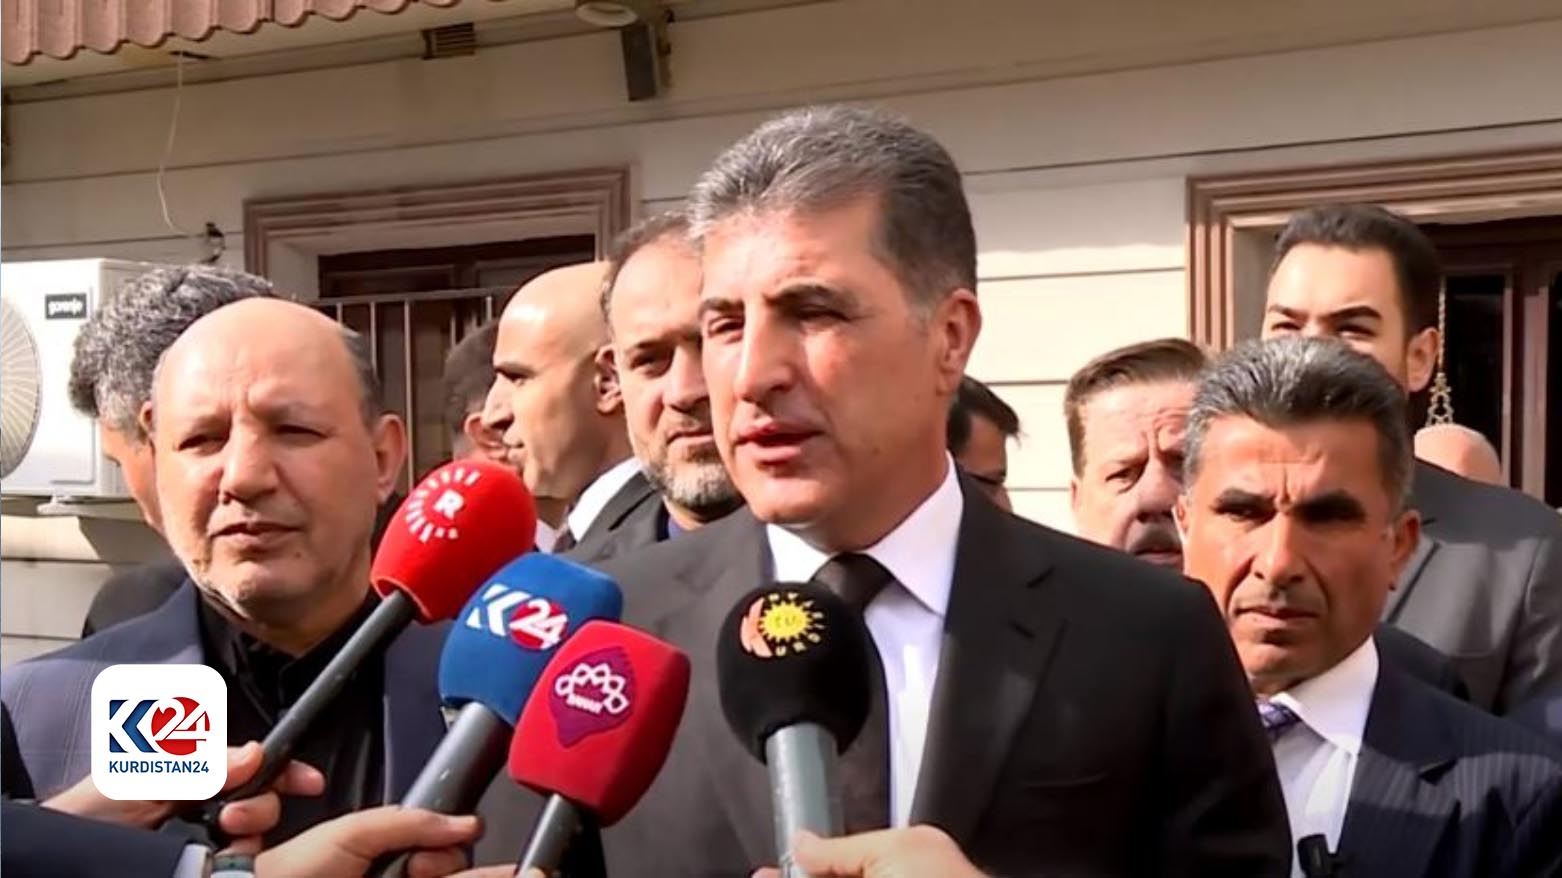 President Nechirvan Barzani expresses his condolences to the victims of the ISIS attack in Iran